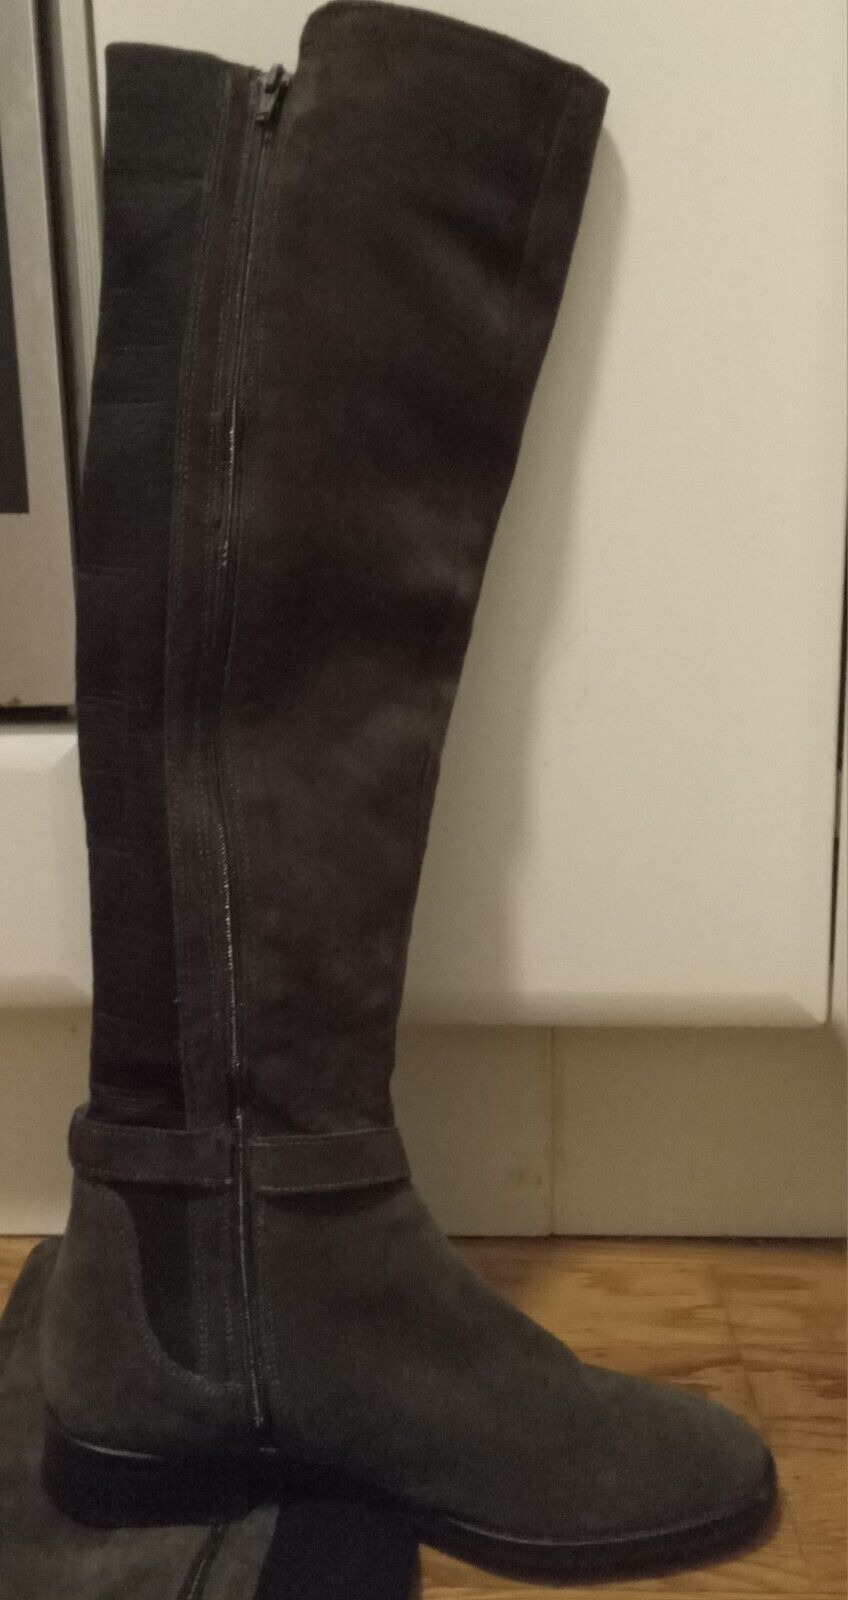 DIanna Gregorry Women's Knee High Suede Riding Boots Sz39 | eBay